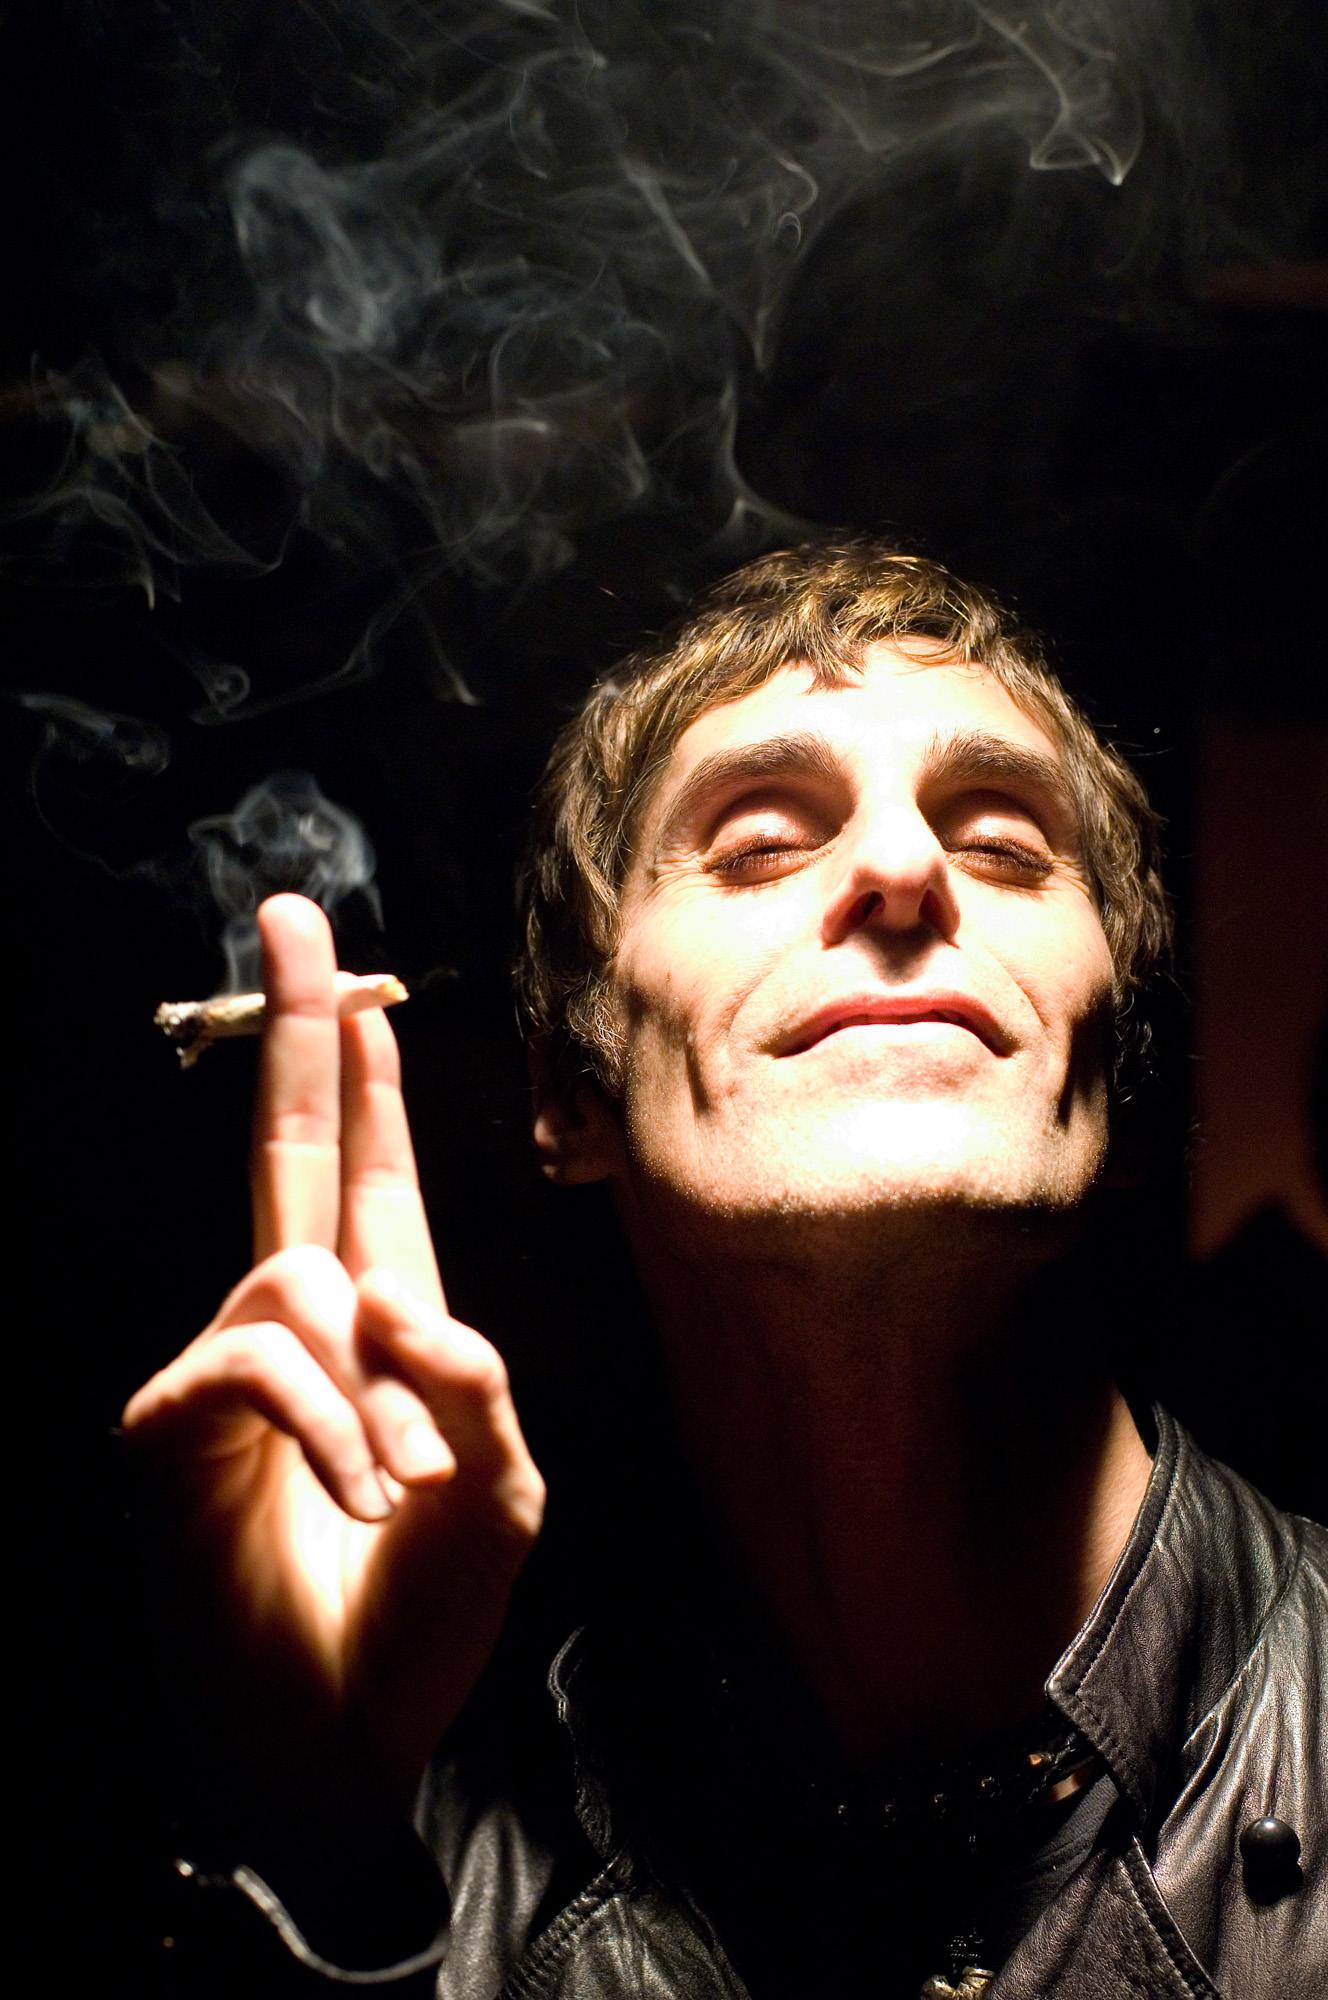 Perry Farrell smoking a cigarette (or weed)
